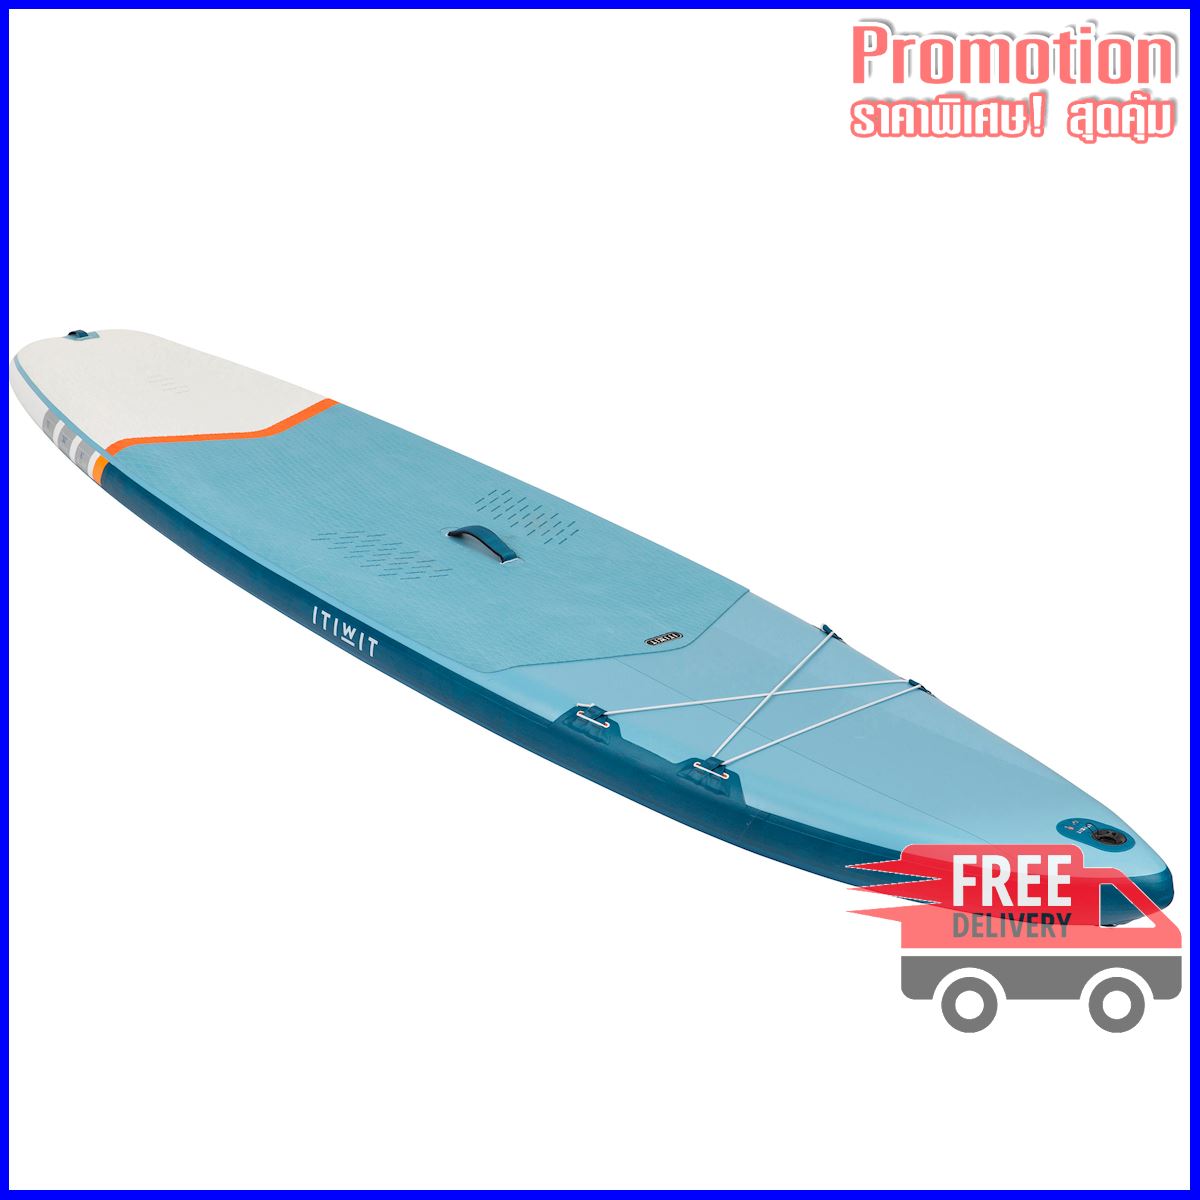 BEGINNER'S INFLATABLE TOURING STAND-UP PADDLEBOARD 11 FEET - BLUE